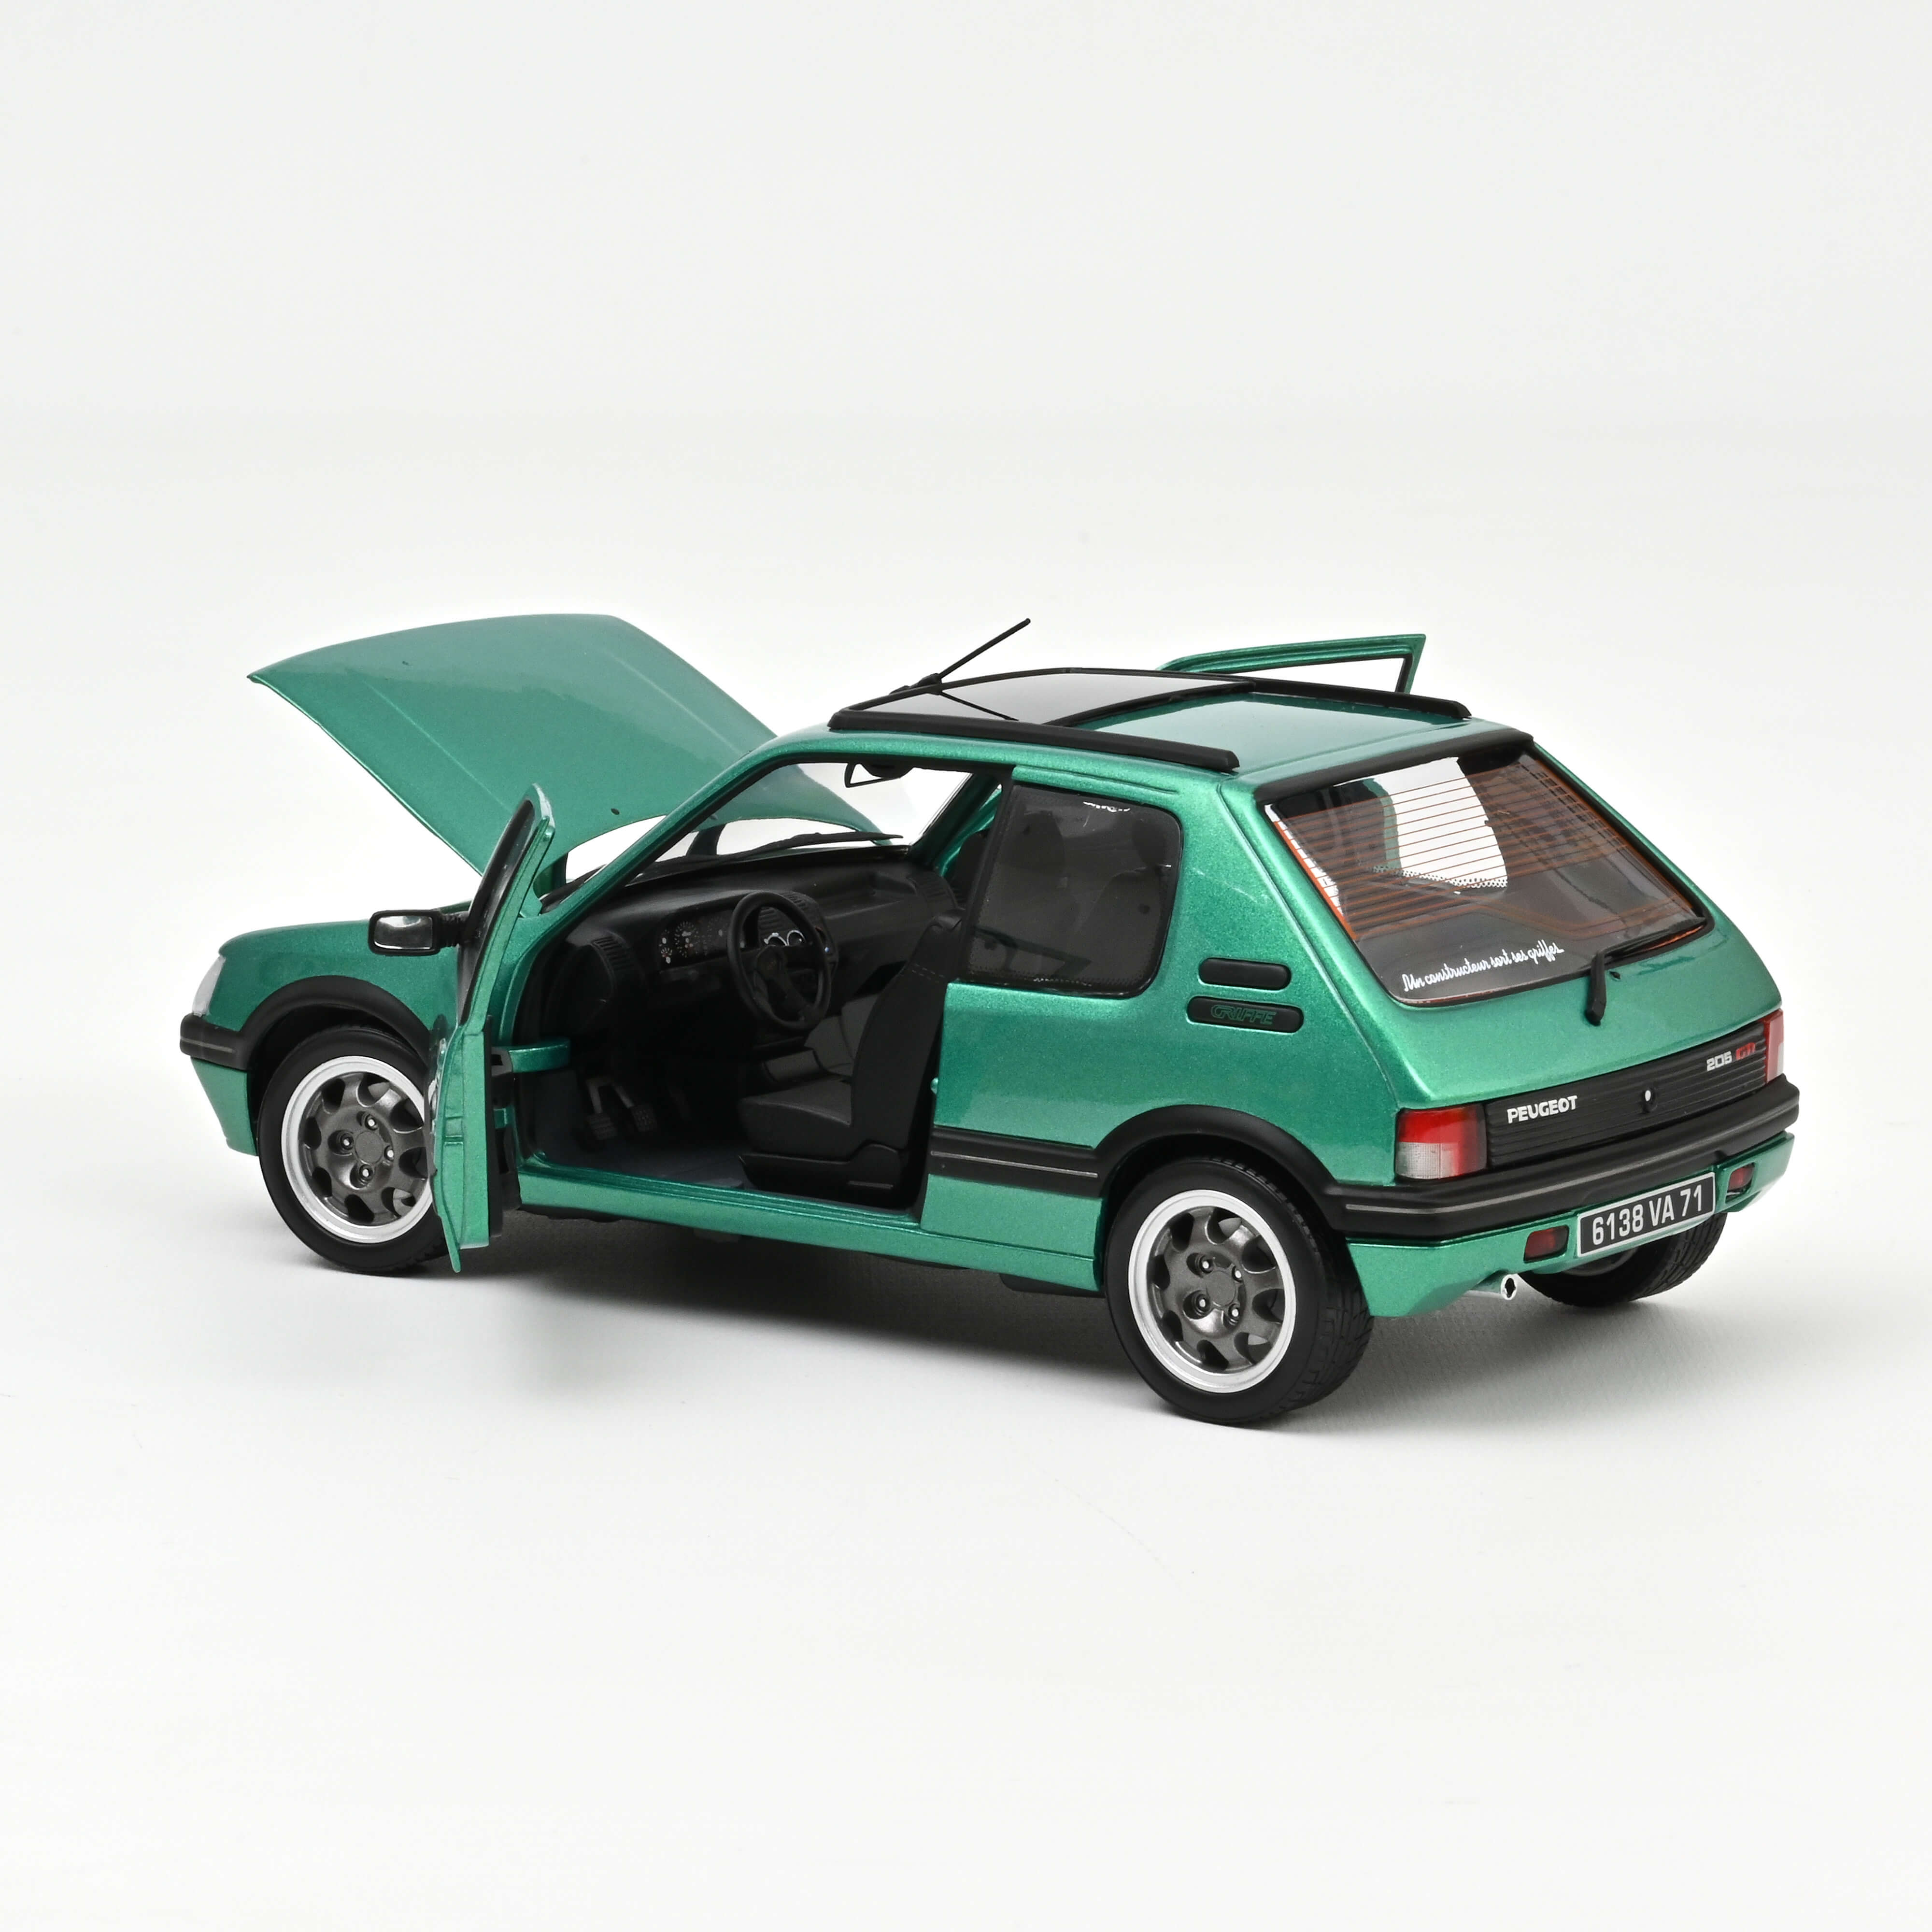 Peugeot 205 GTi´91 grün 1:18 Griffe with windowroof 1991 Green 1:18